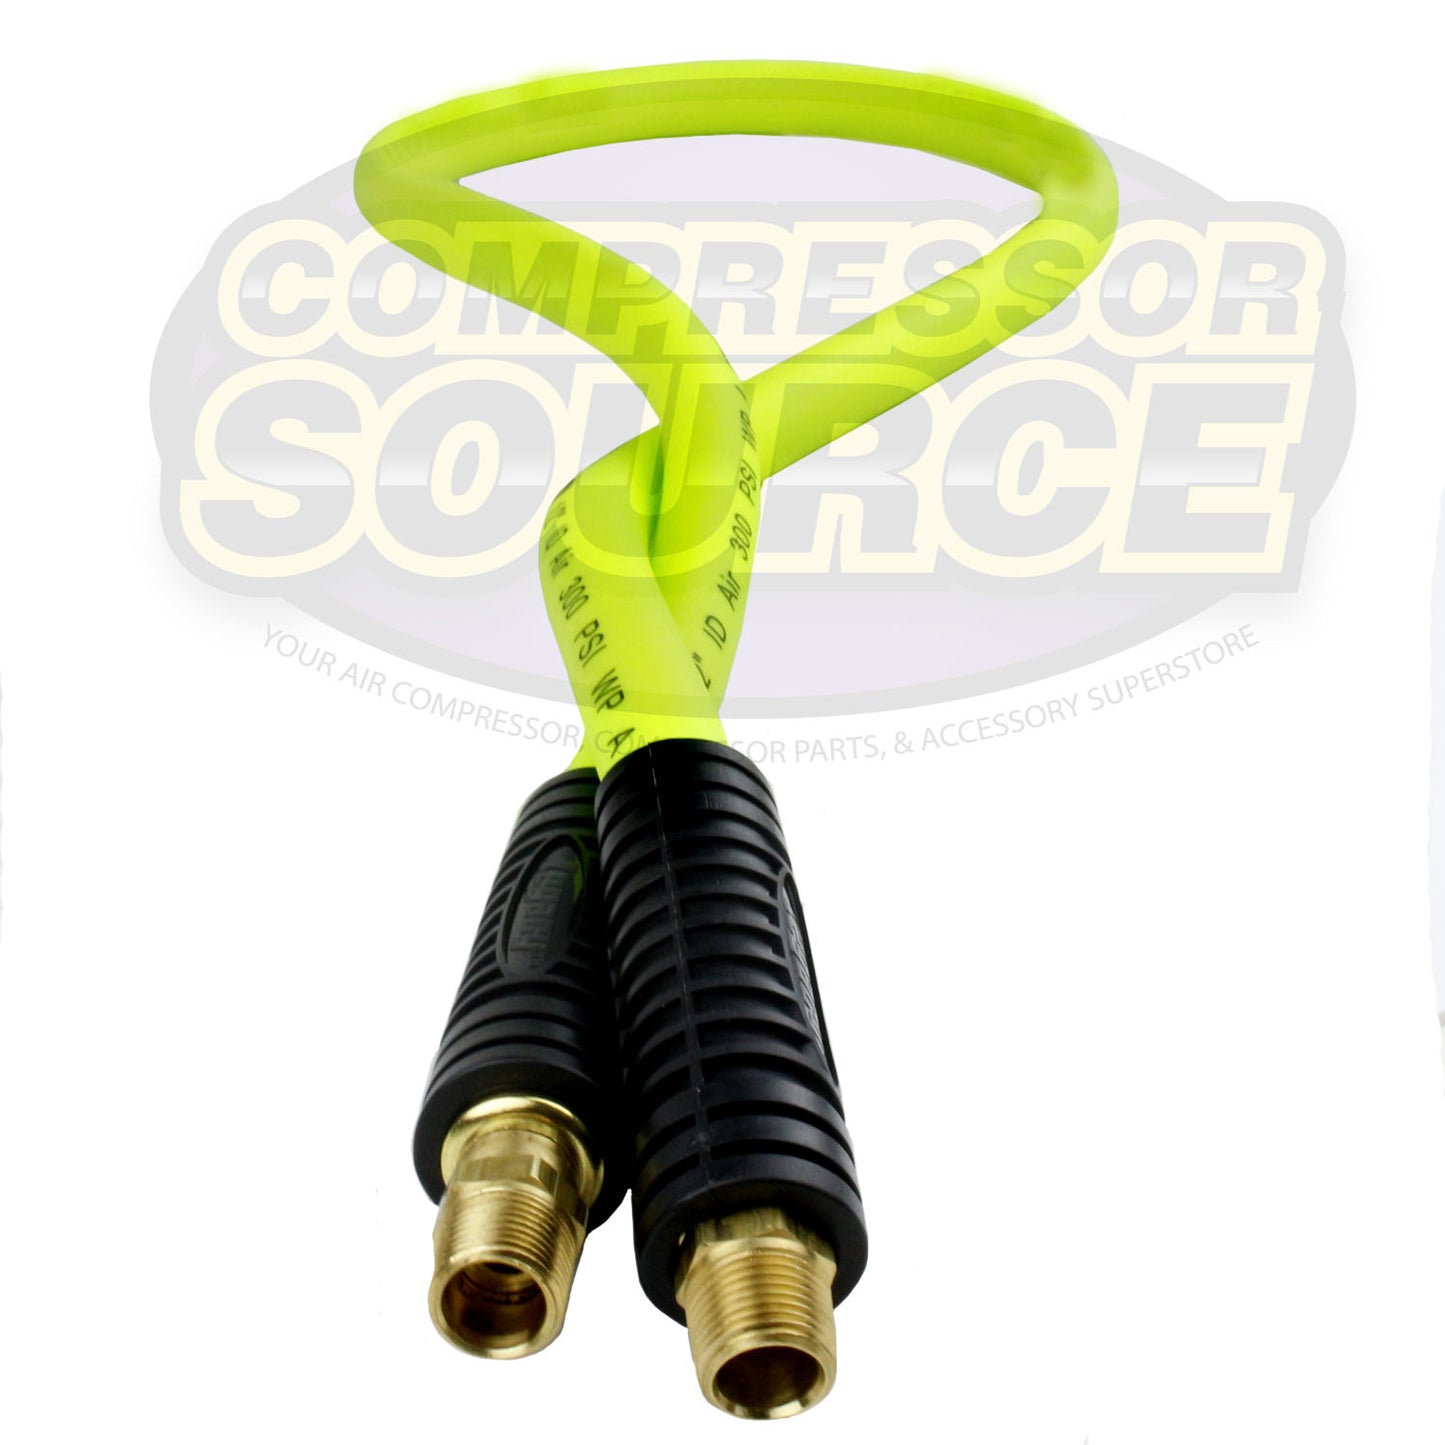 New Flexzilla 1/2" x 4' FT Air Hose Whip With 3/8' MNPT Swivel HFZ1204YW3S